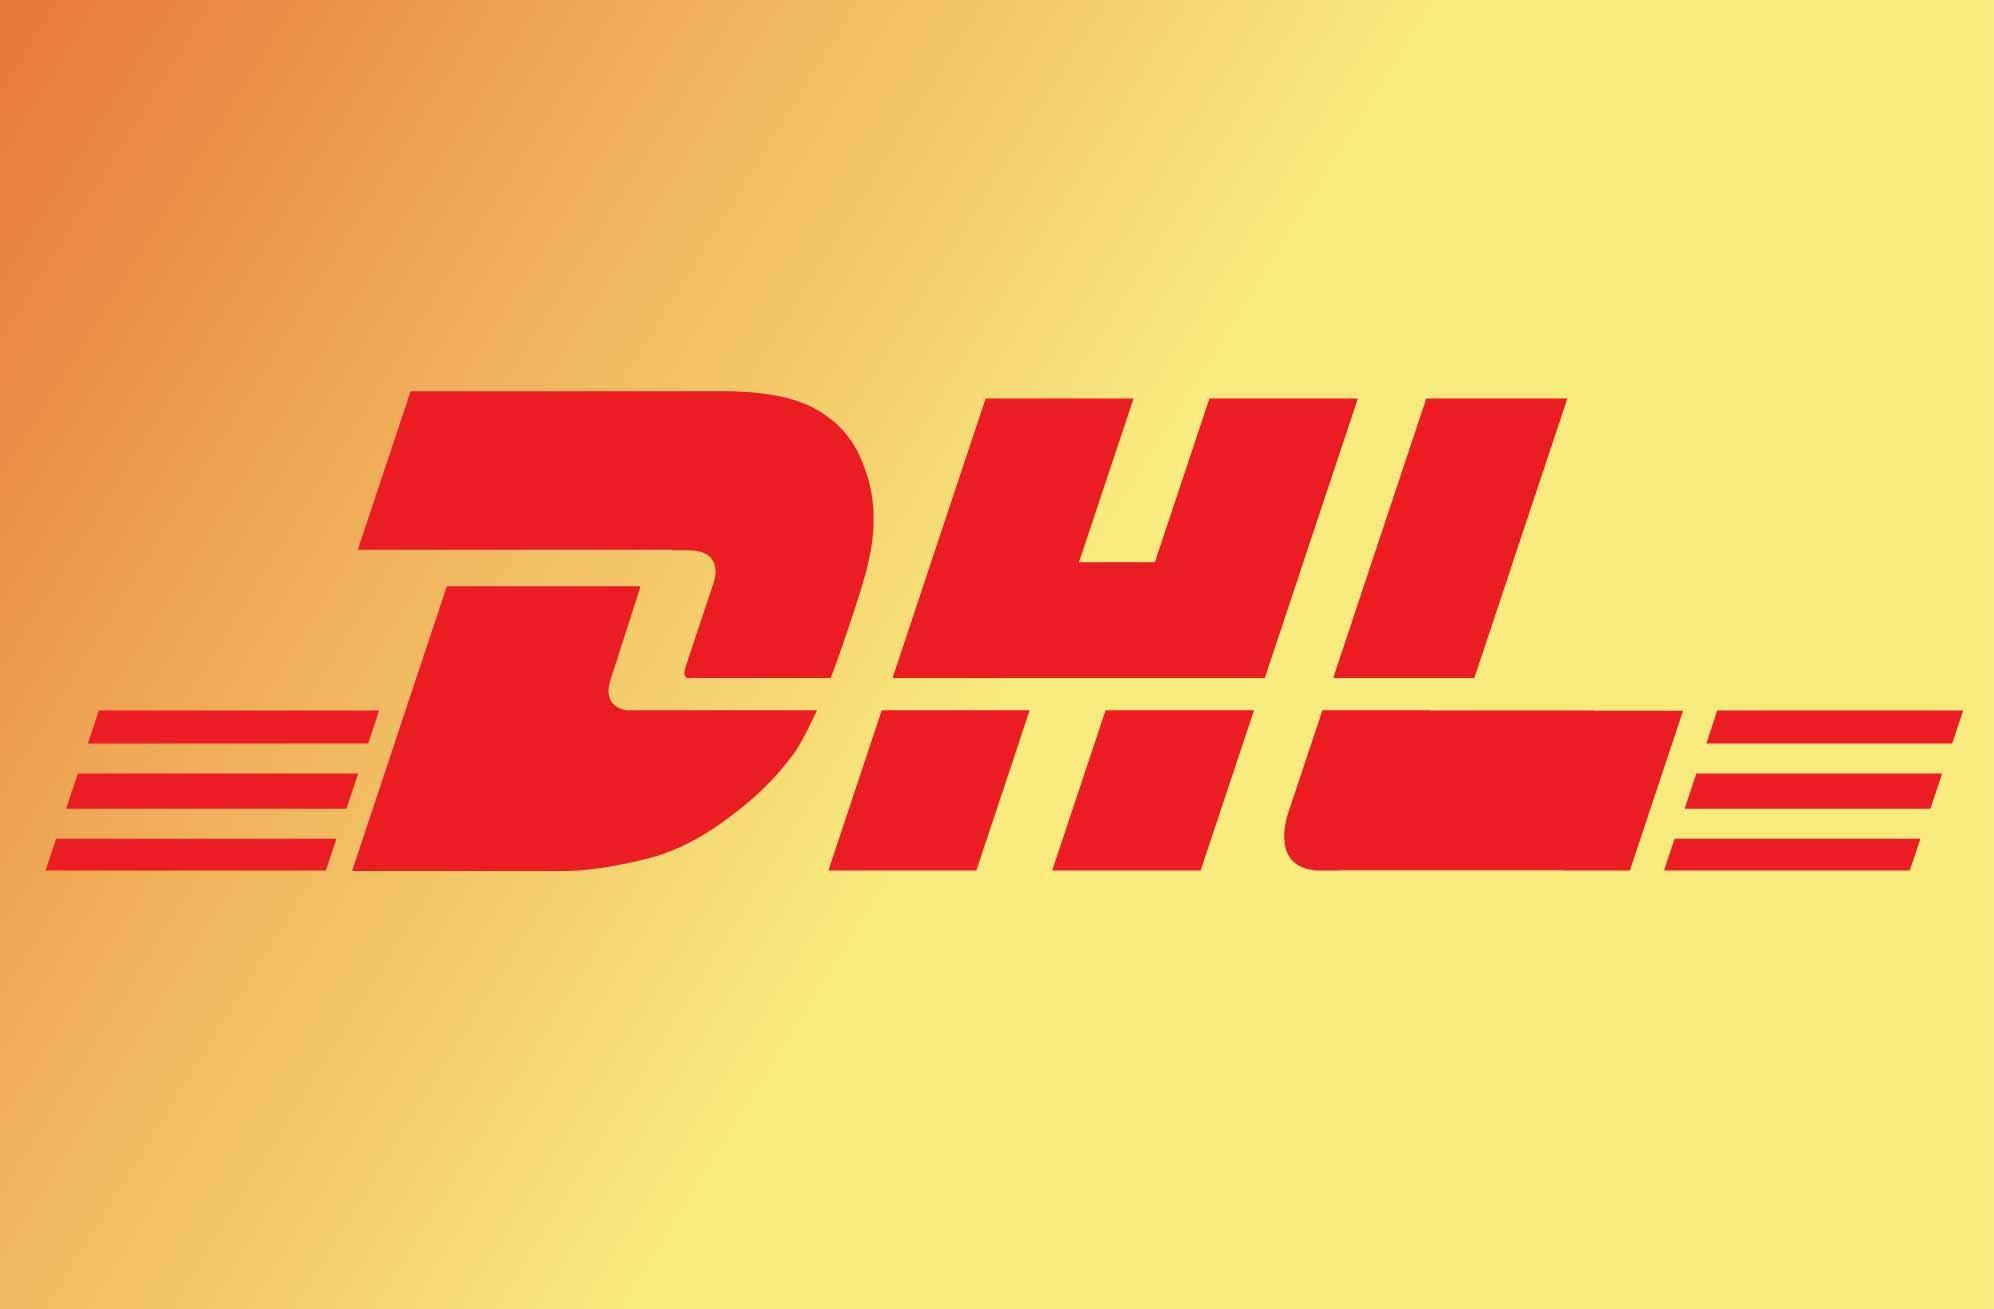 DHL Wallpaper Full HD Picture